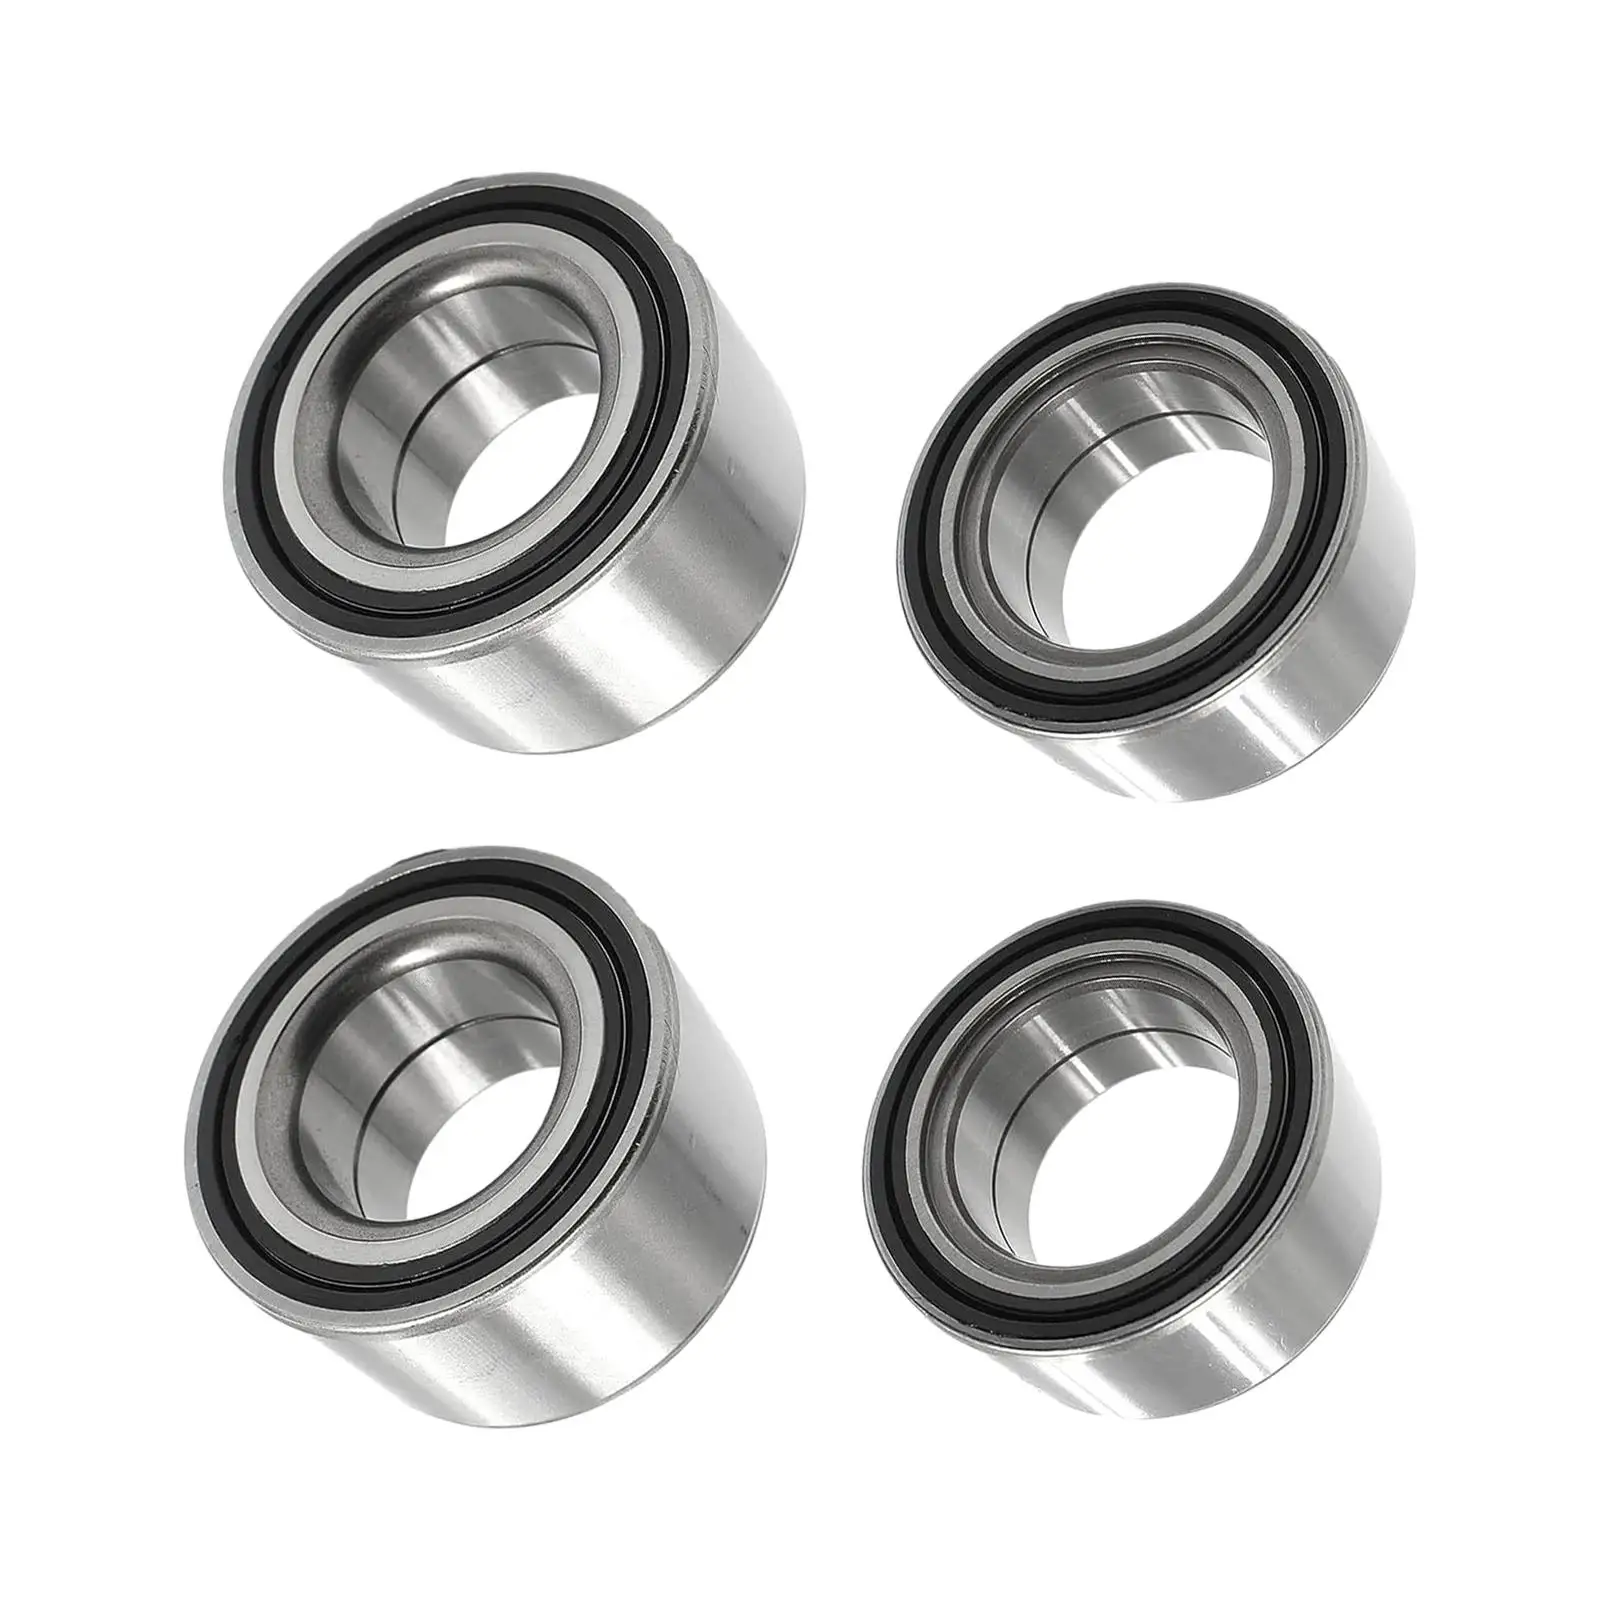 

4 Pieces Front and Rear Wheel Bearings 3514627 for Polaris 800 570 800 Direct Replacement